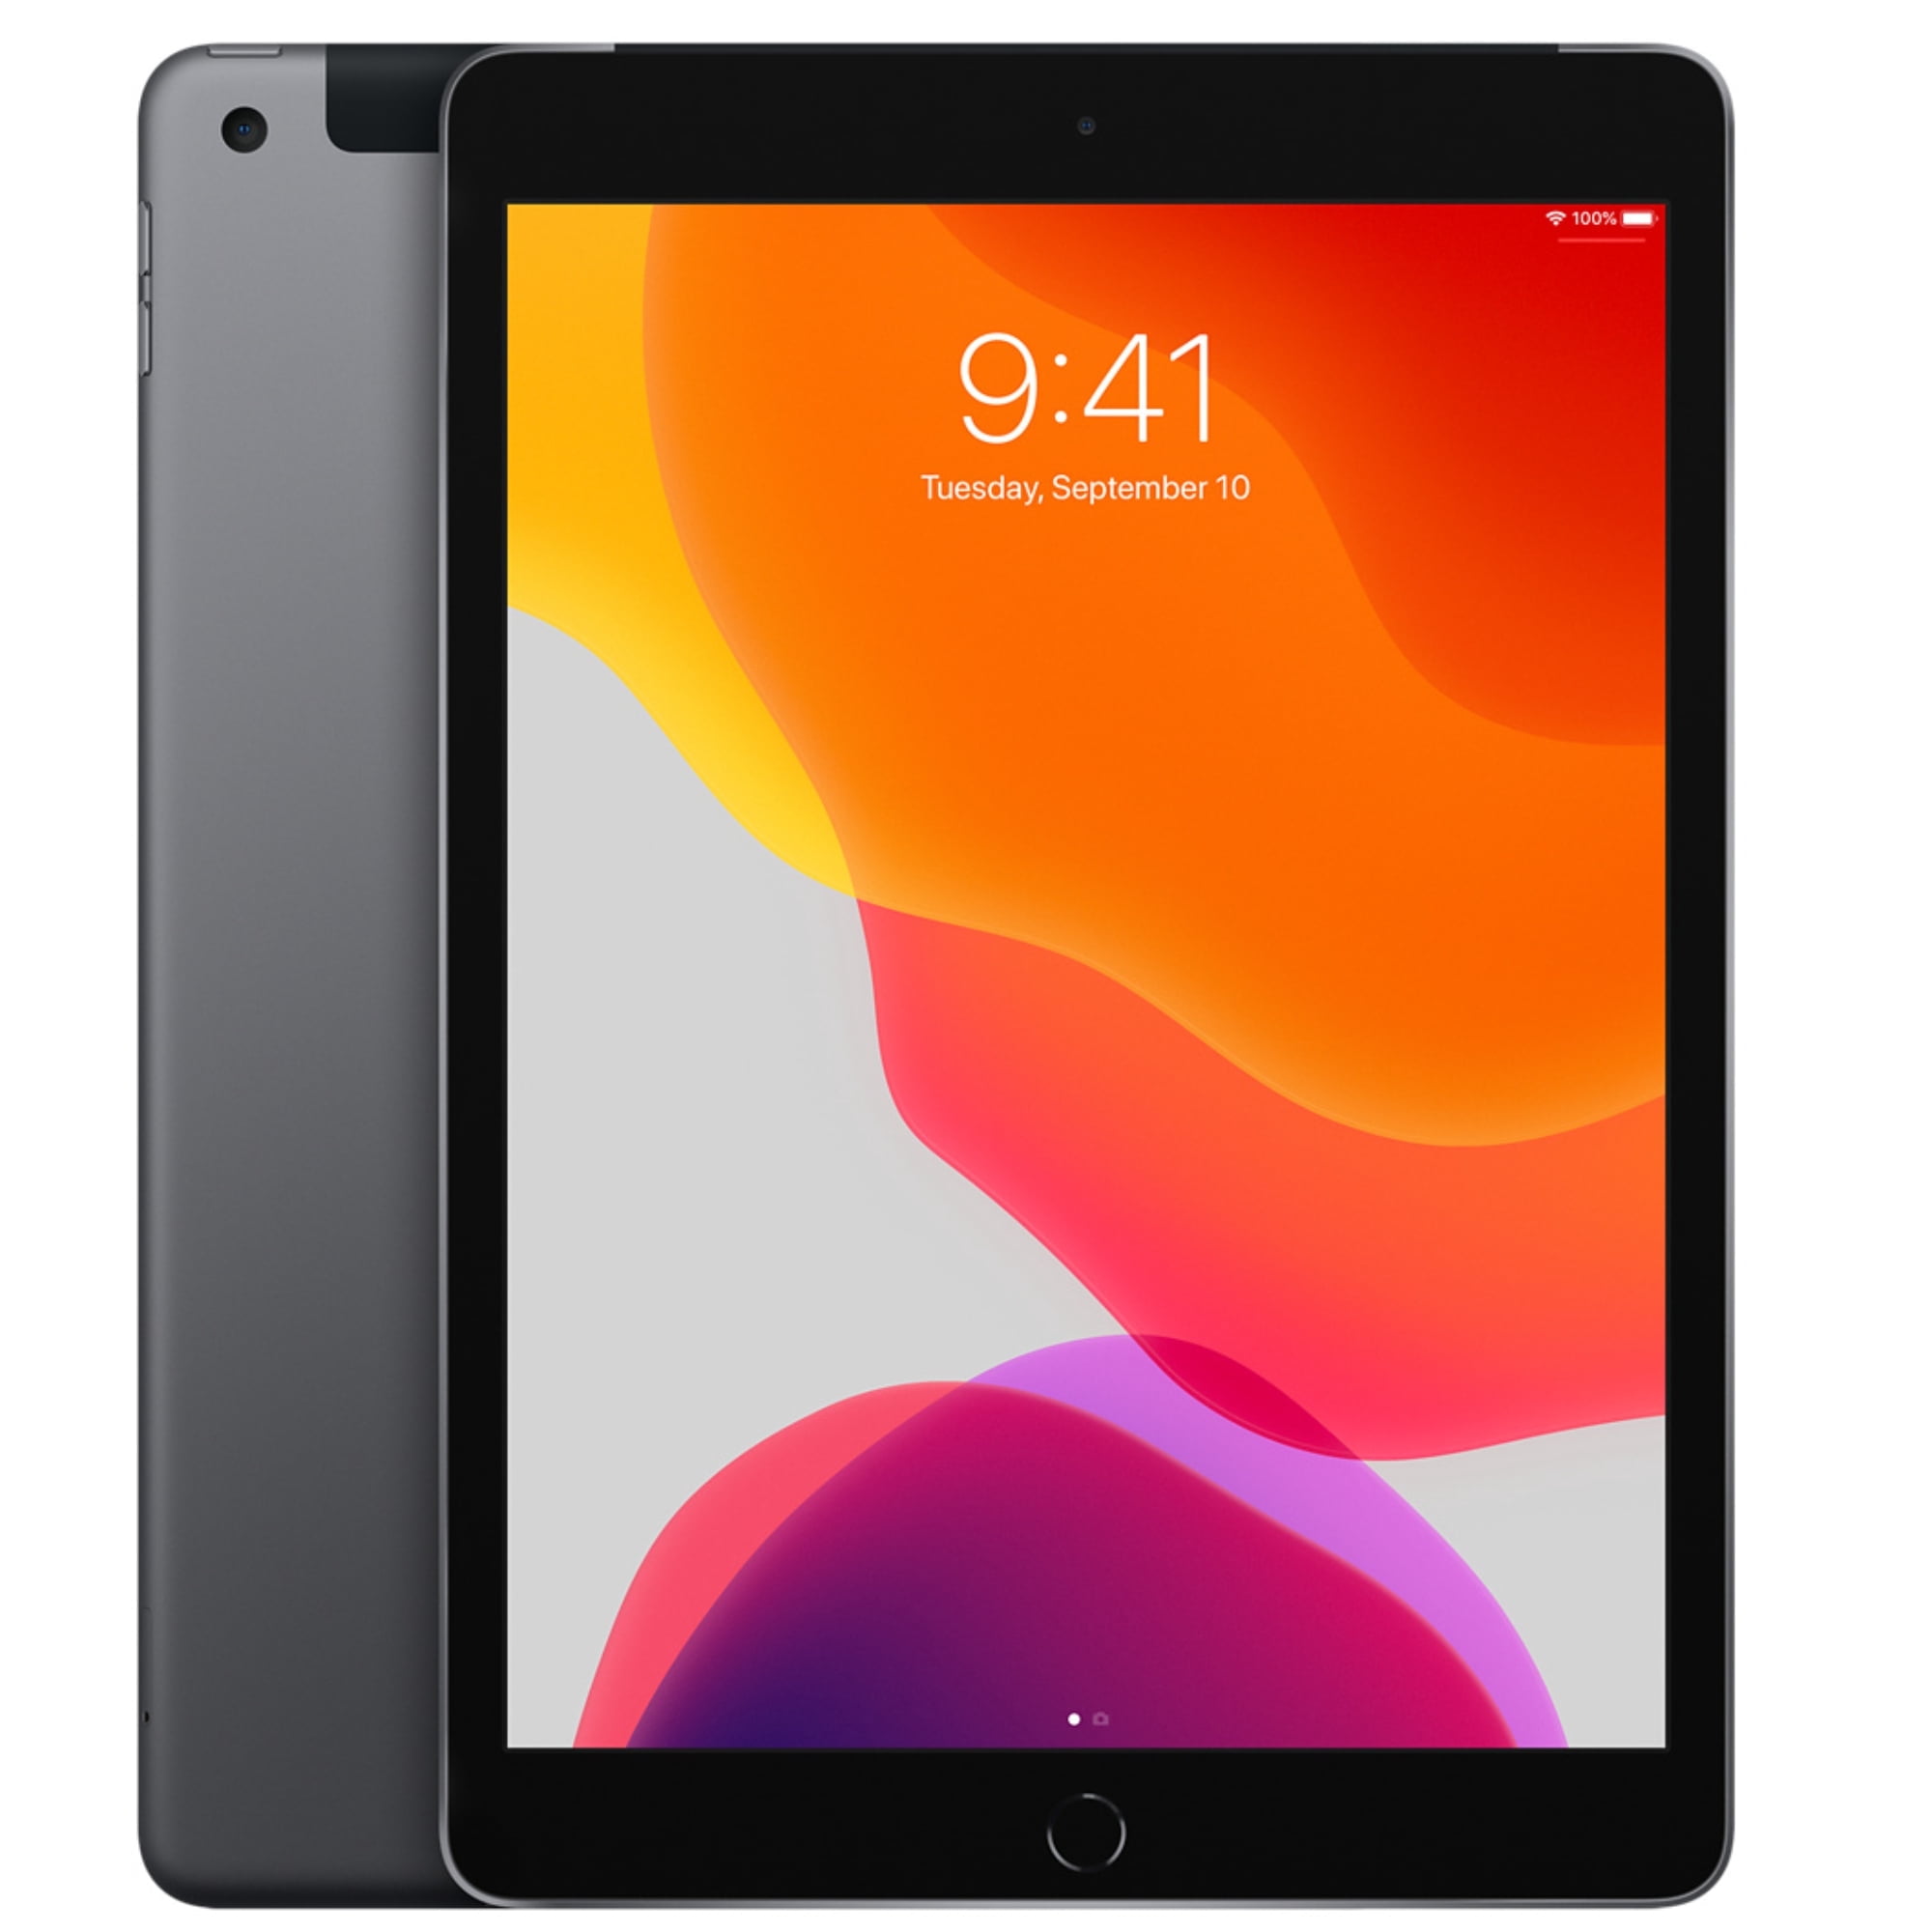 Apple iPad 7th Generation (2019) 10.2-inch WiFi + Cellular, Space Gray 32GB  (Scratch and Dent)